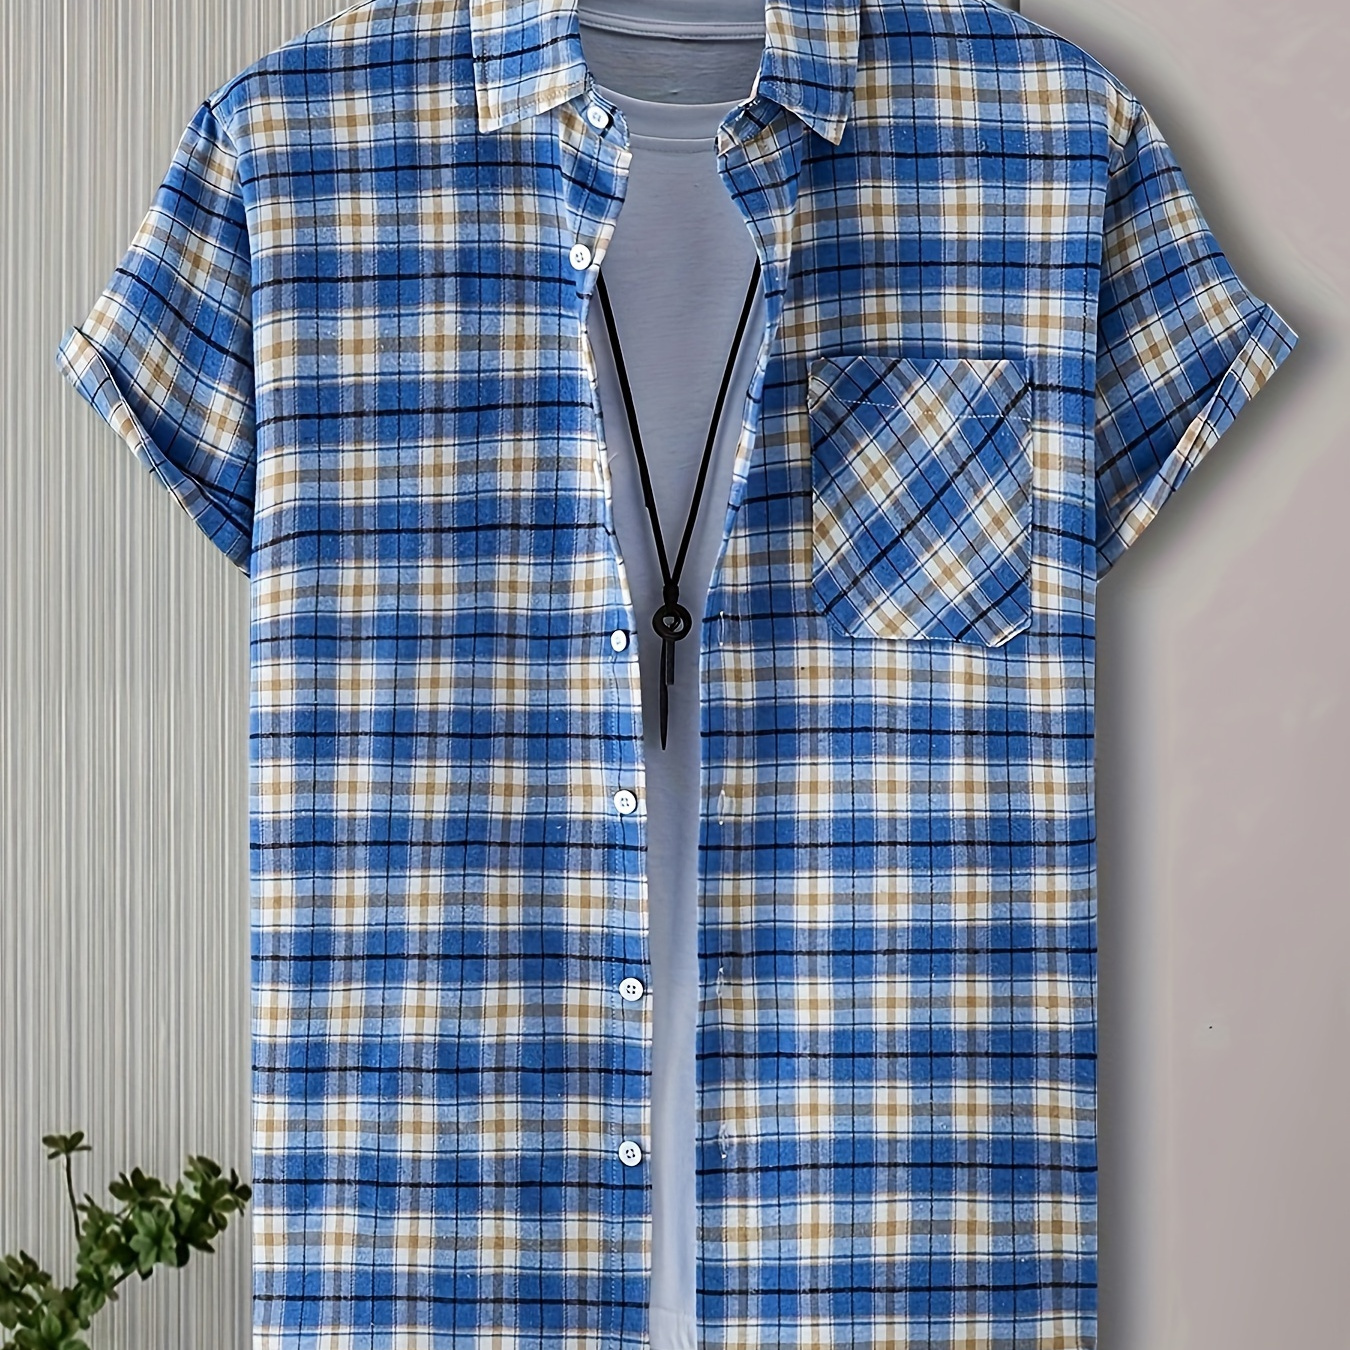 

Stylish Plaid Pattern Men's Short Sleeve Button Down Shirt With Chest Pocket, Summer Resort Vacation